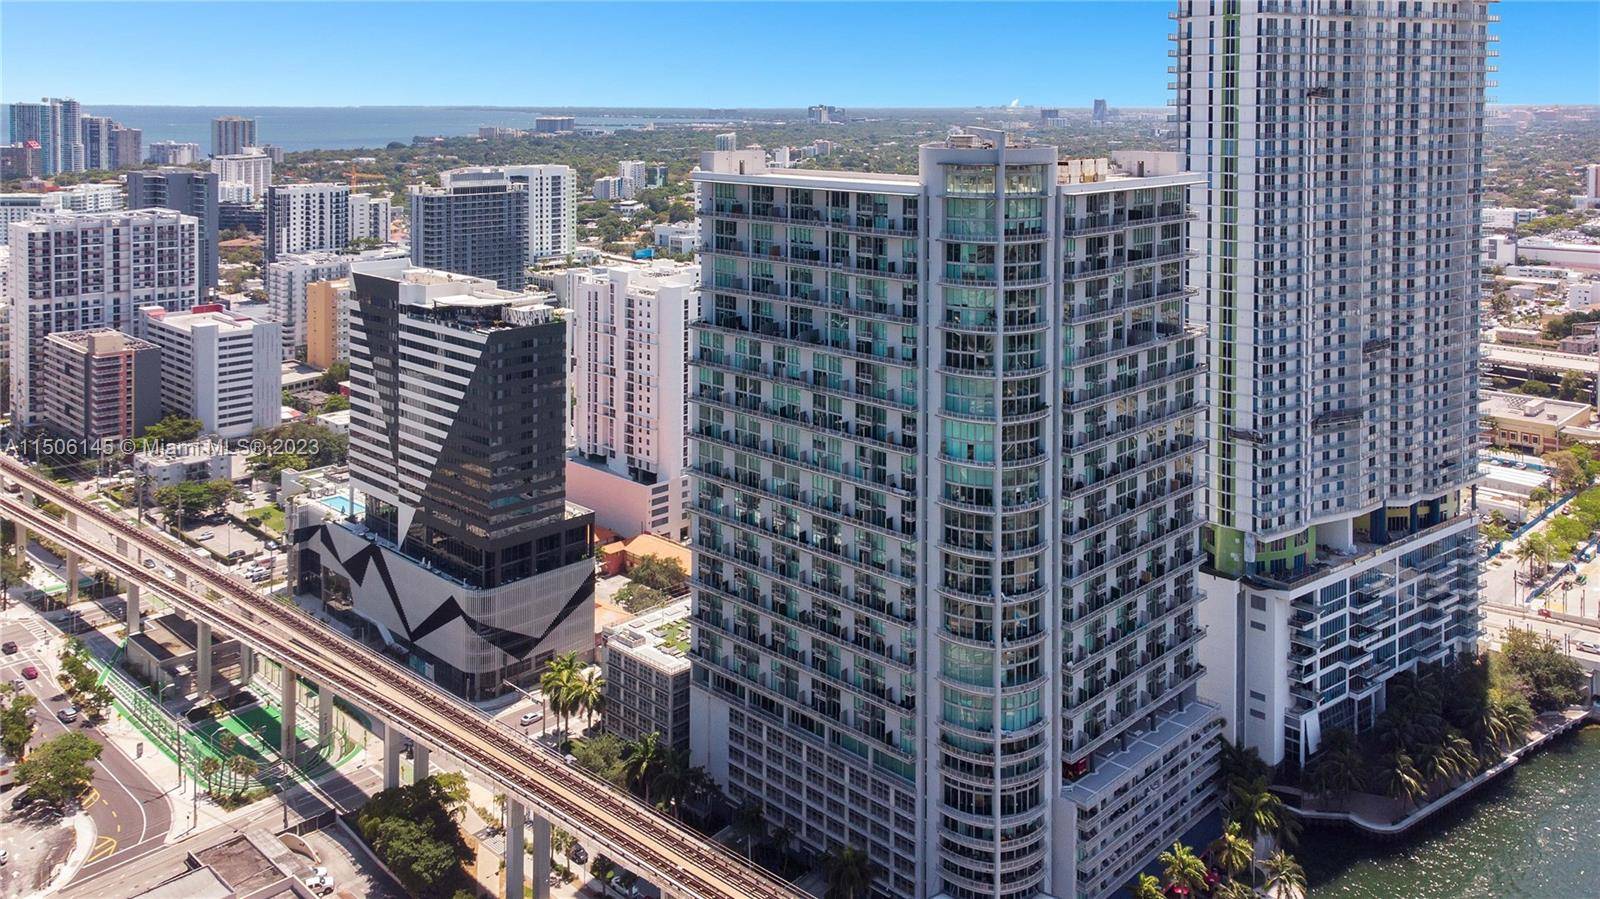 Embrace the Miami Lifestyle Luxurious Loft Living in the Heart of Brickell Discover the epitome of urban chic in this New York style loft condo, nestled in the vibrant heart ...